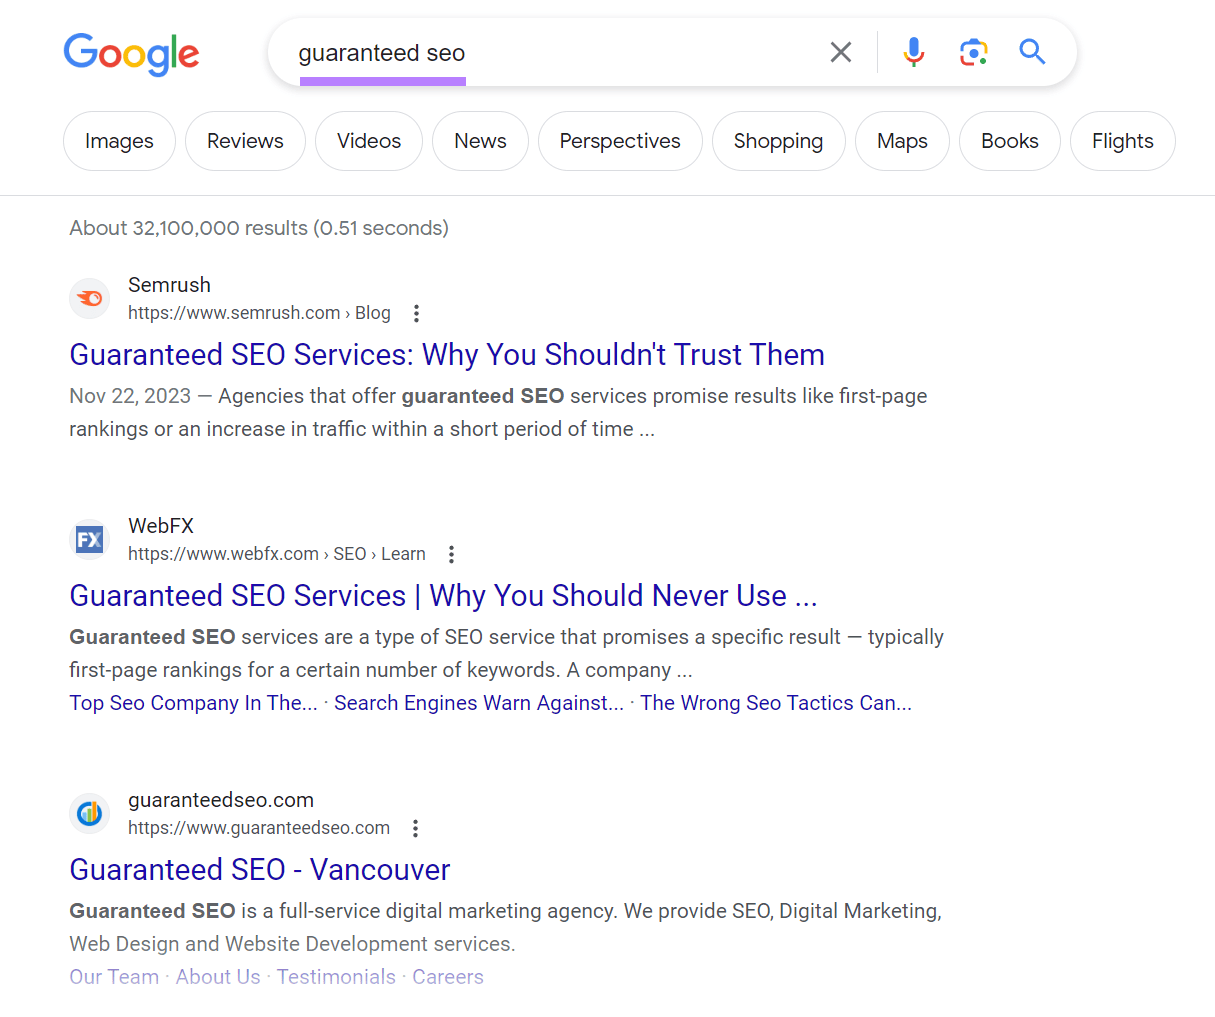 Google's SERP for "guaranteed seo" query shows organic search results at top